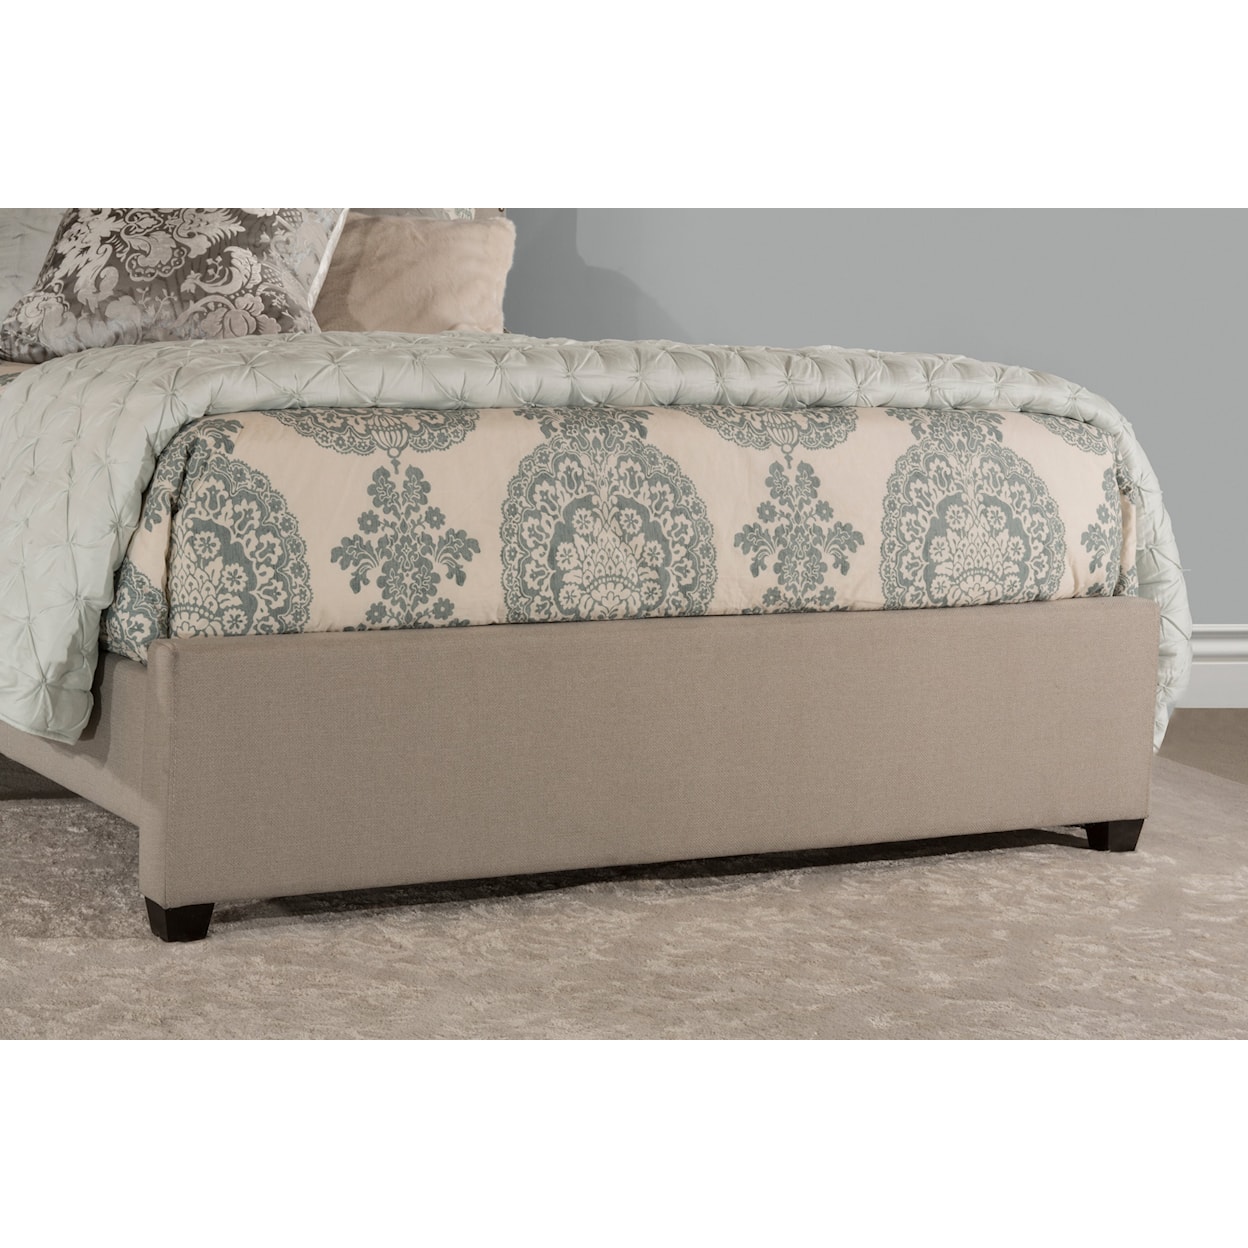 Hillsdale Lila King Bed